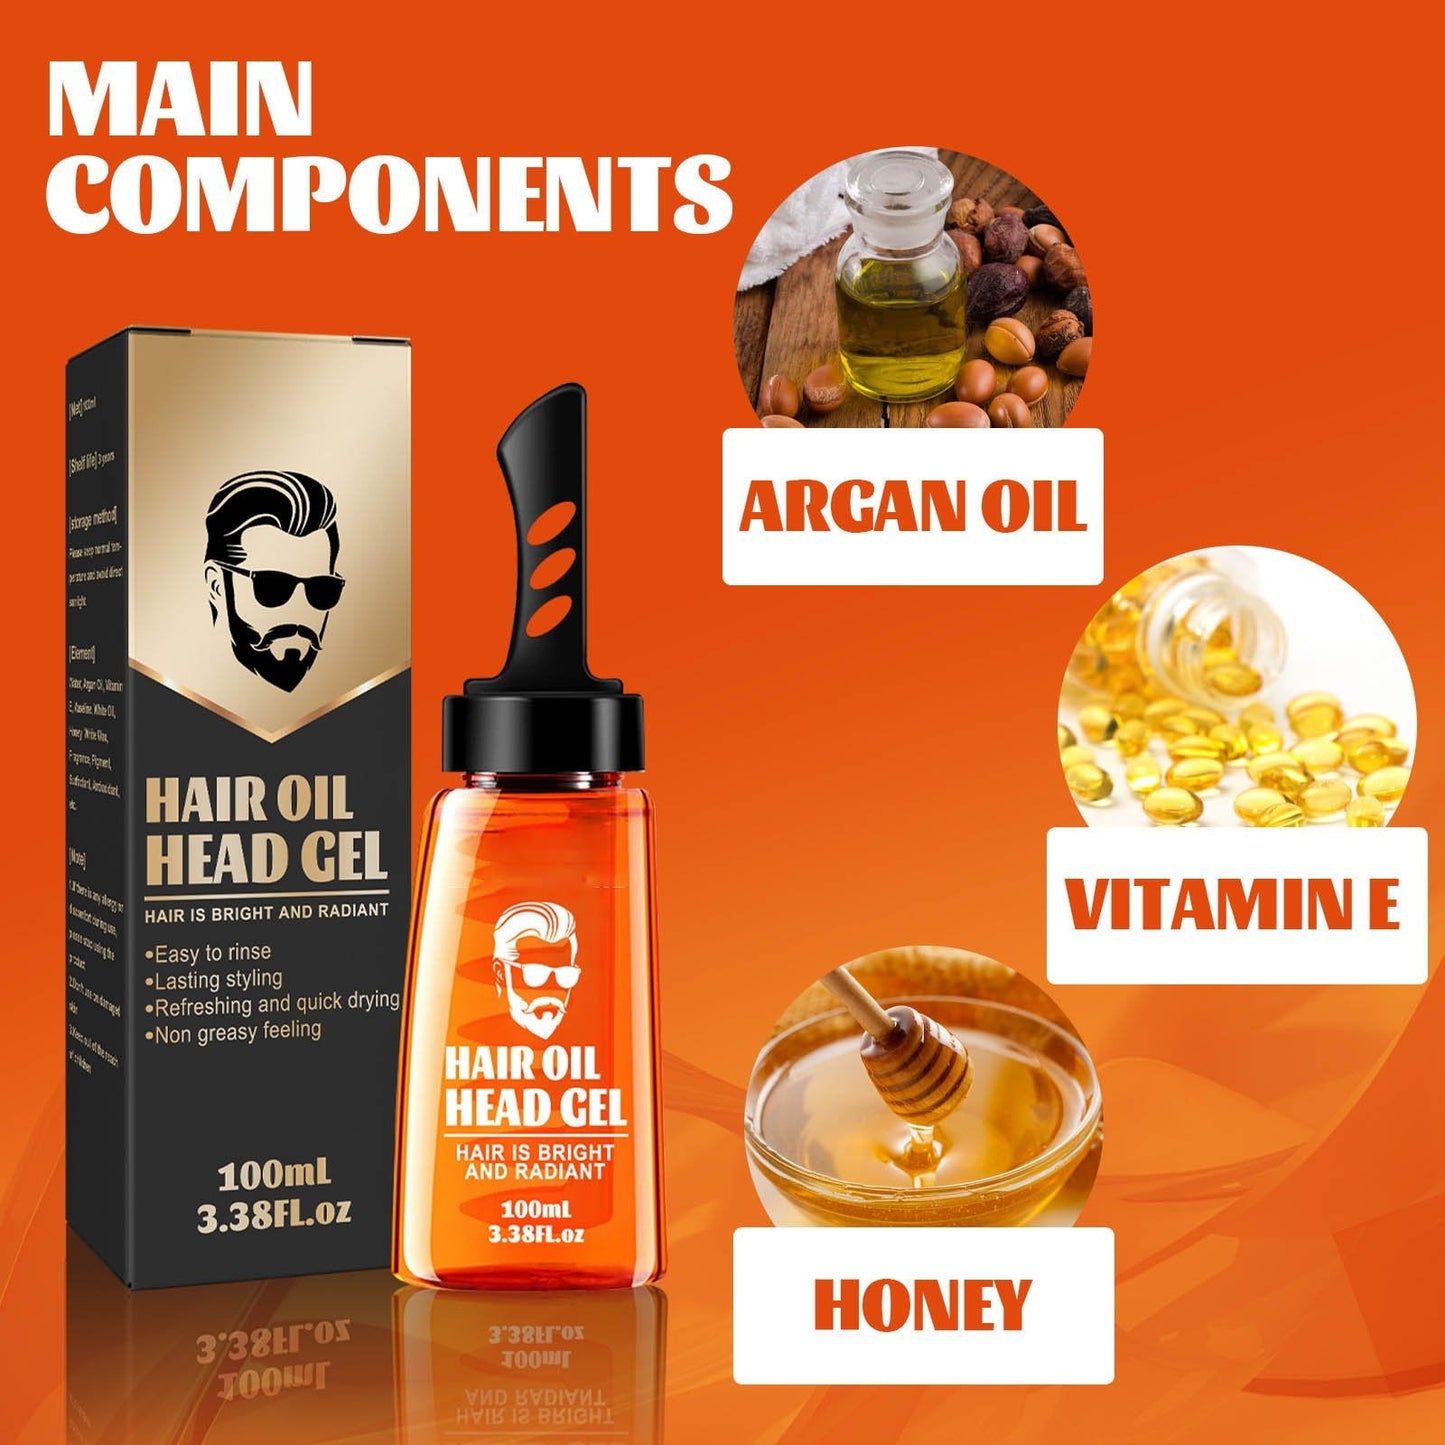 One Comb Styling - Men's Hair Oil